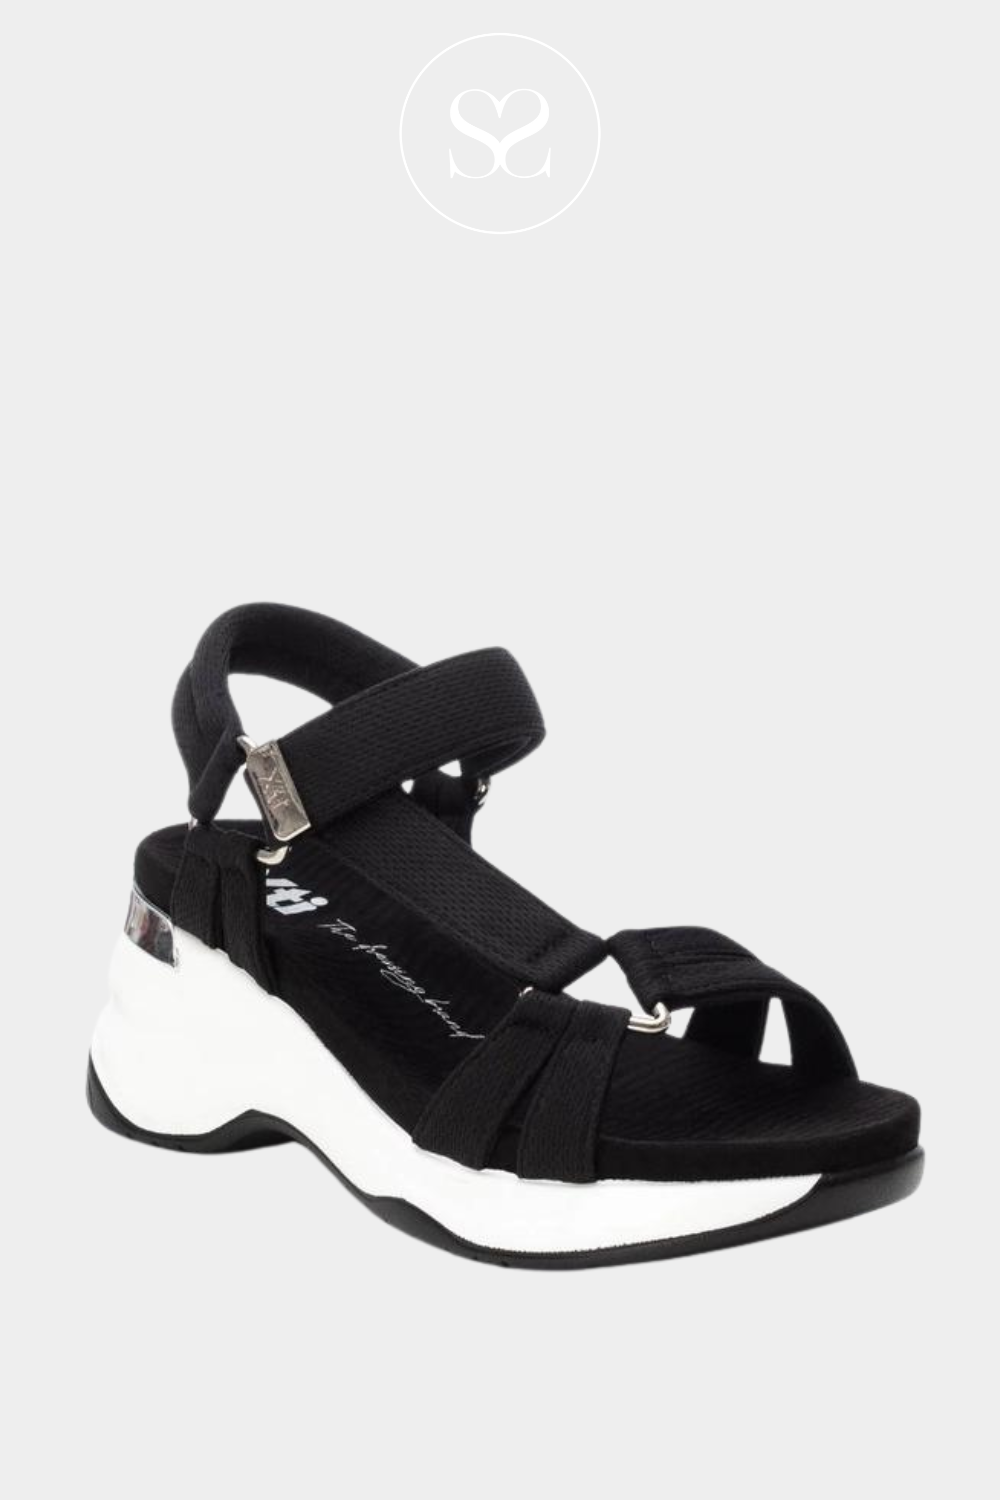 XTI 142623 BLACK WALKING SANDAL WITH A CONTRAST WHITE SOLE AND MIRROR HEEL DETAIL. VELCRO FASTENER 